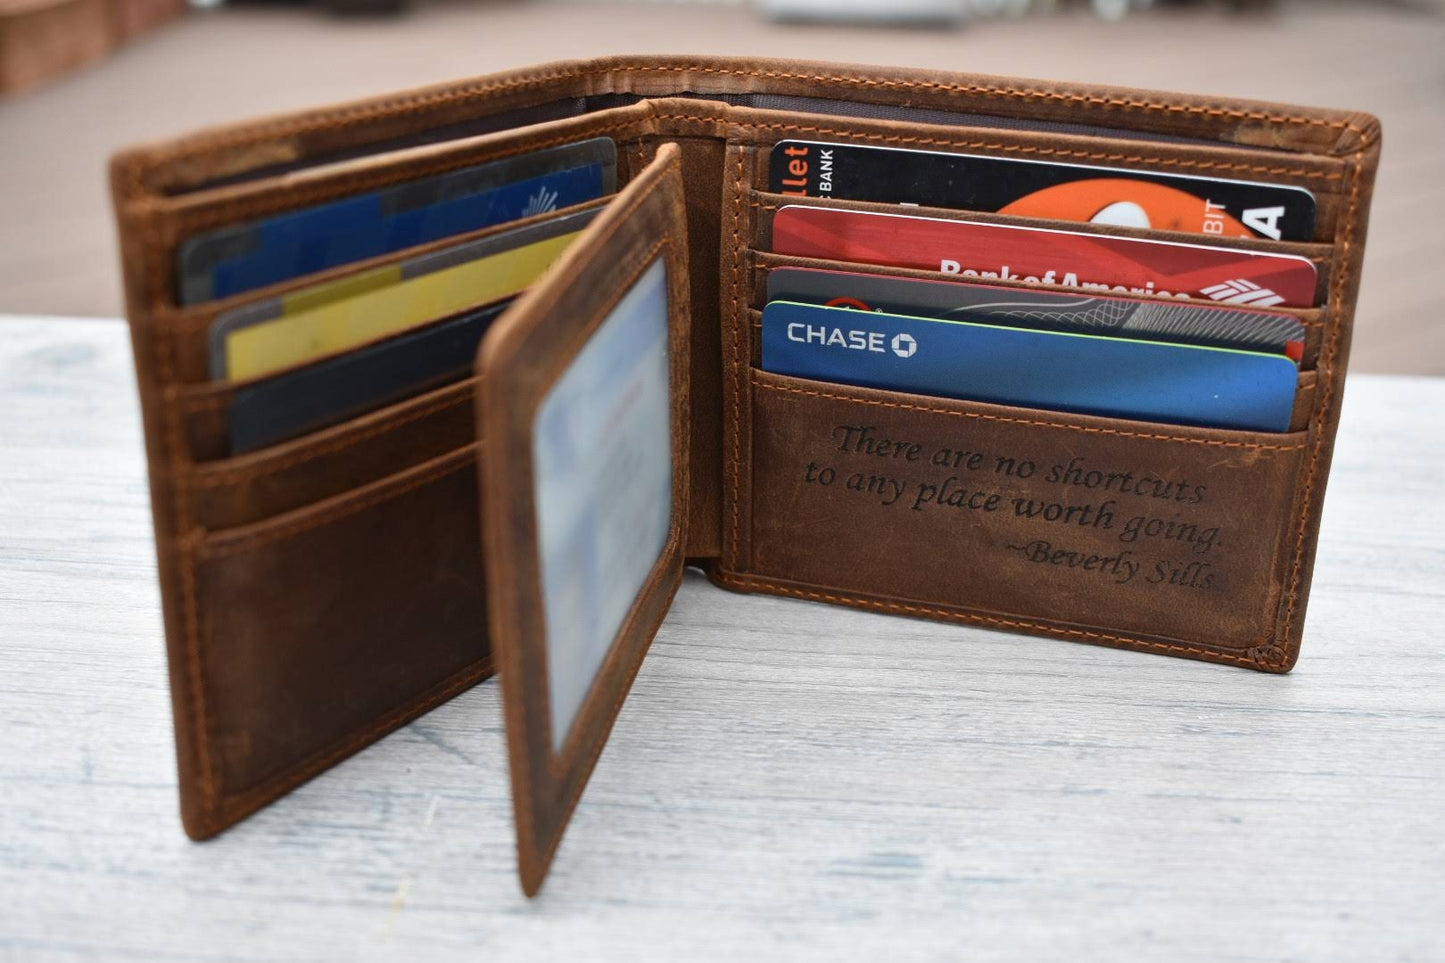 Personalized Leather Wallet - PH18